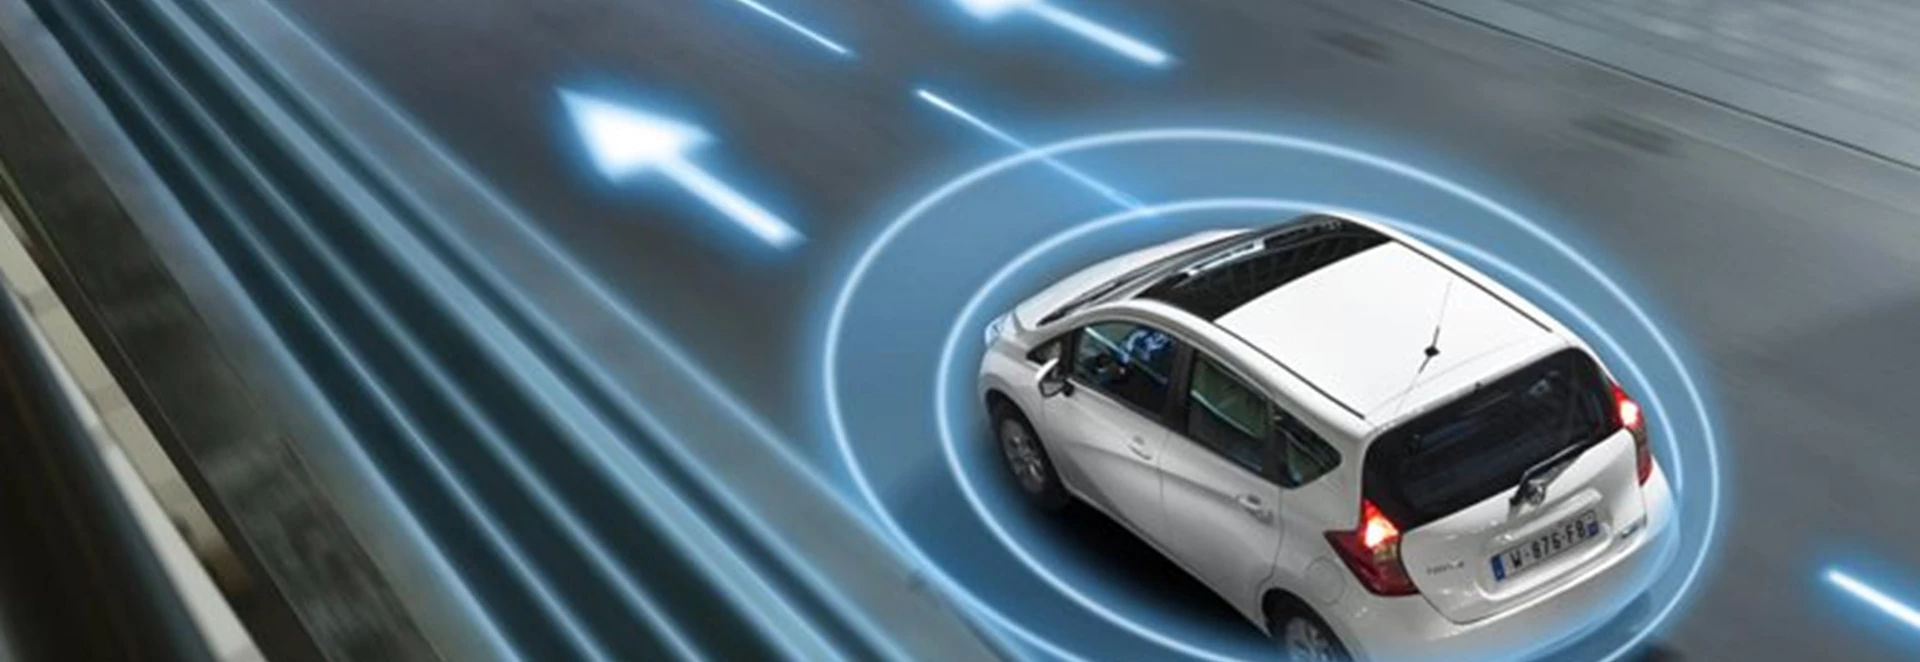 Nissan develops Signal Shield technology to stop phone use behind the wheel